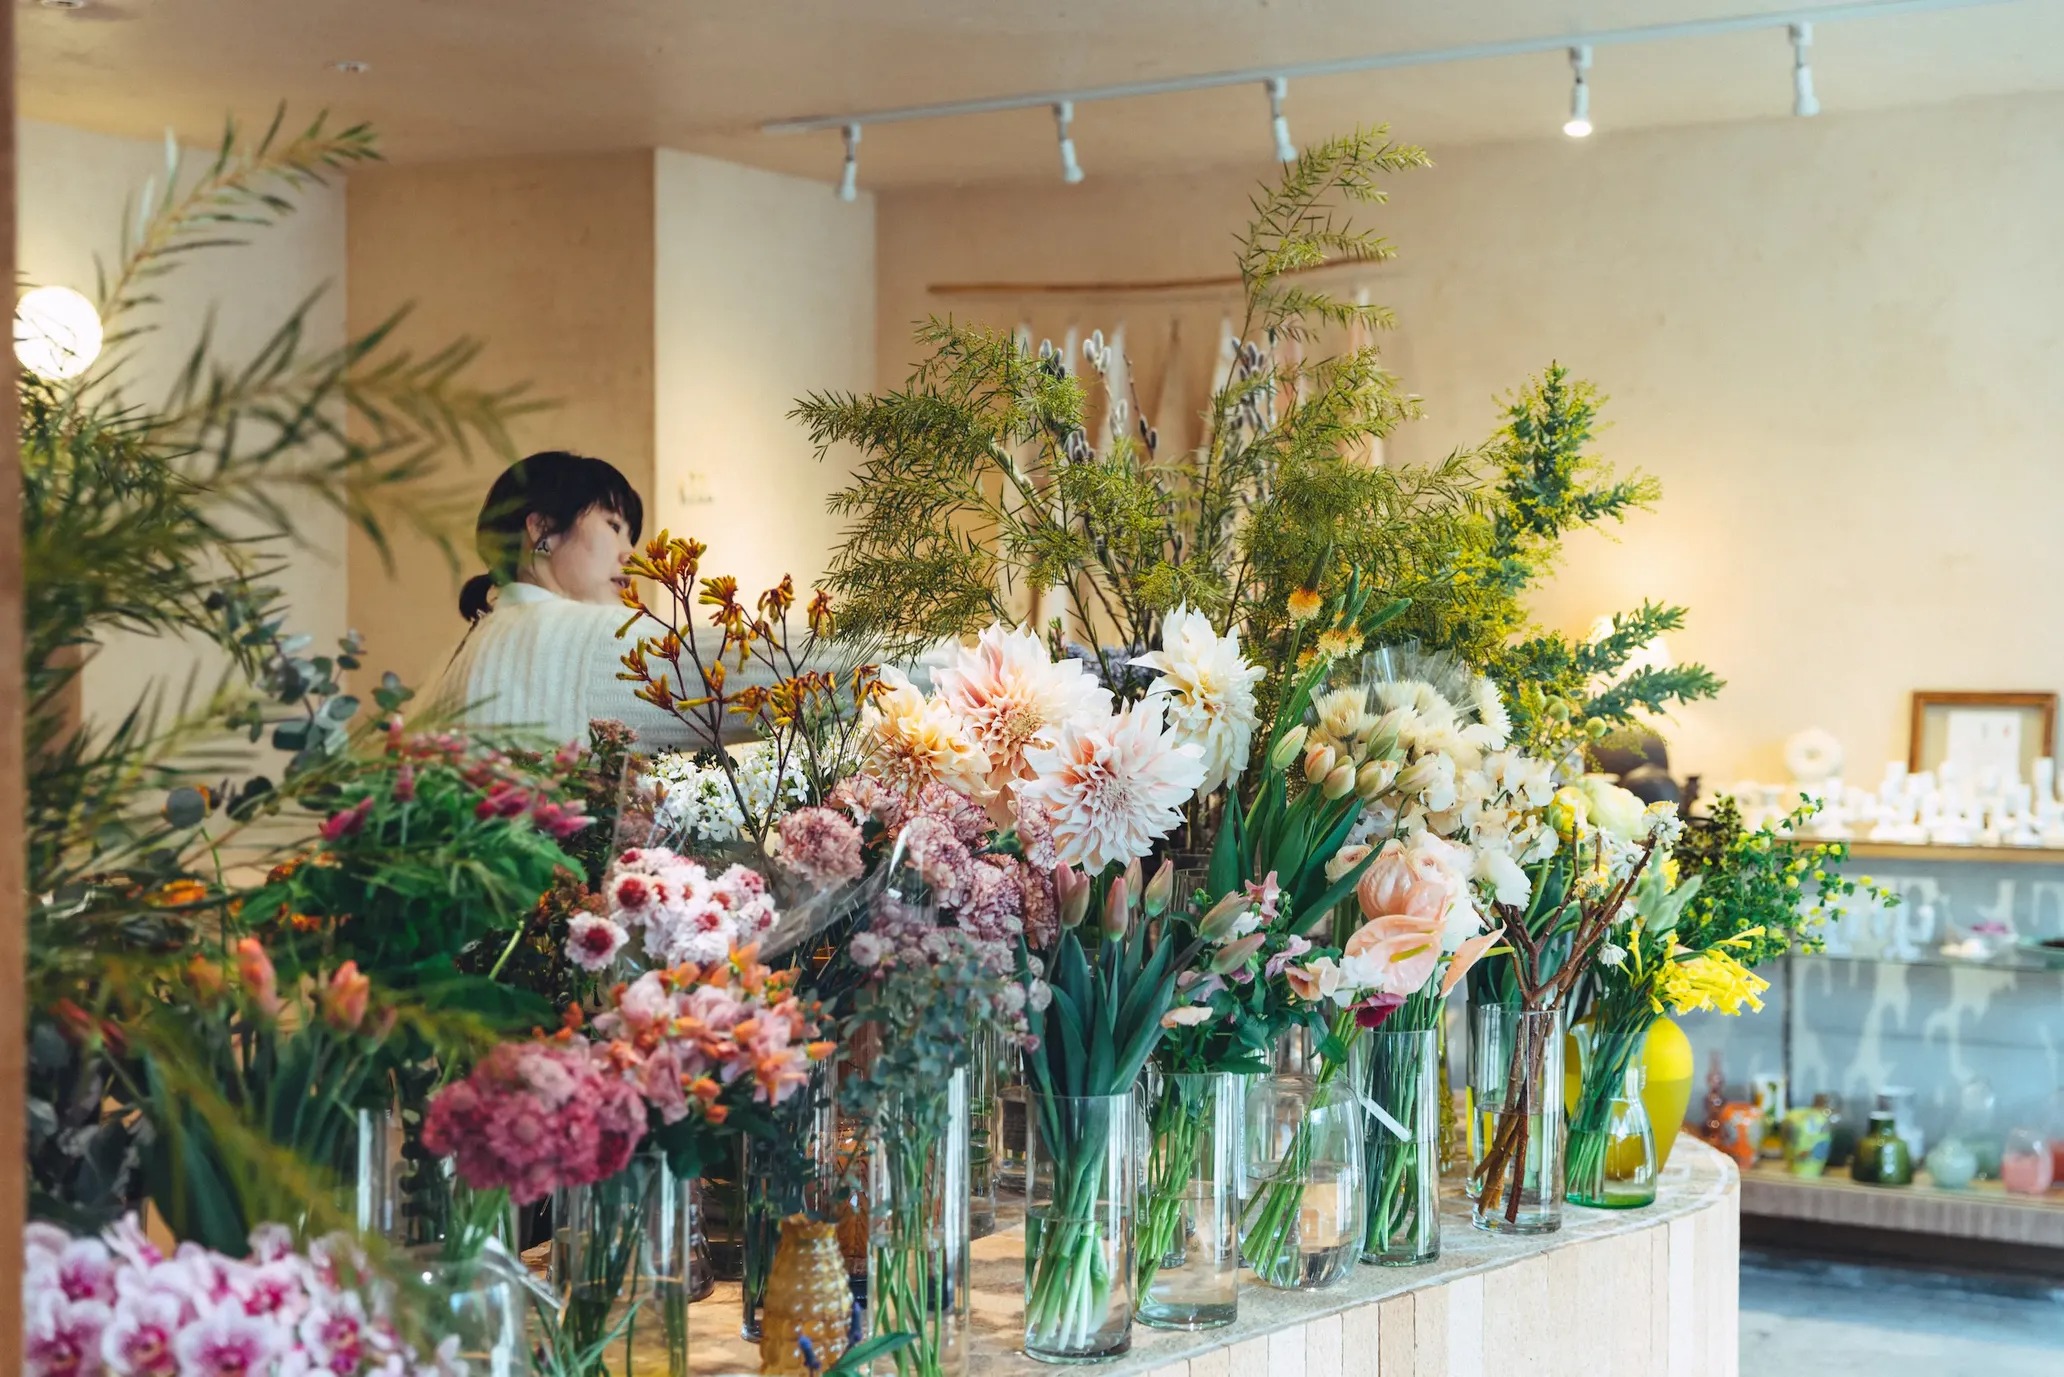 "Olde" is a flower store with a wide variety of flowers purchased from markets nationwide